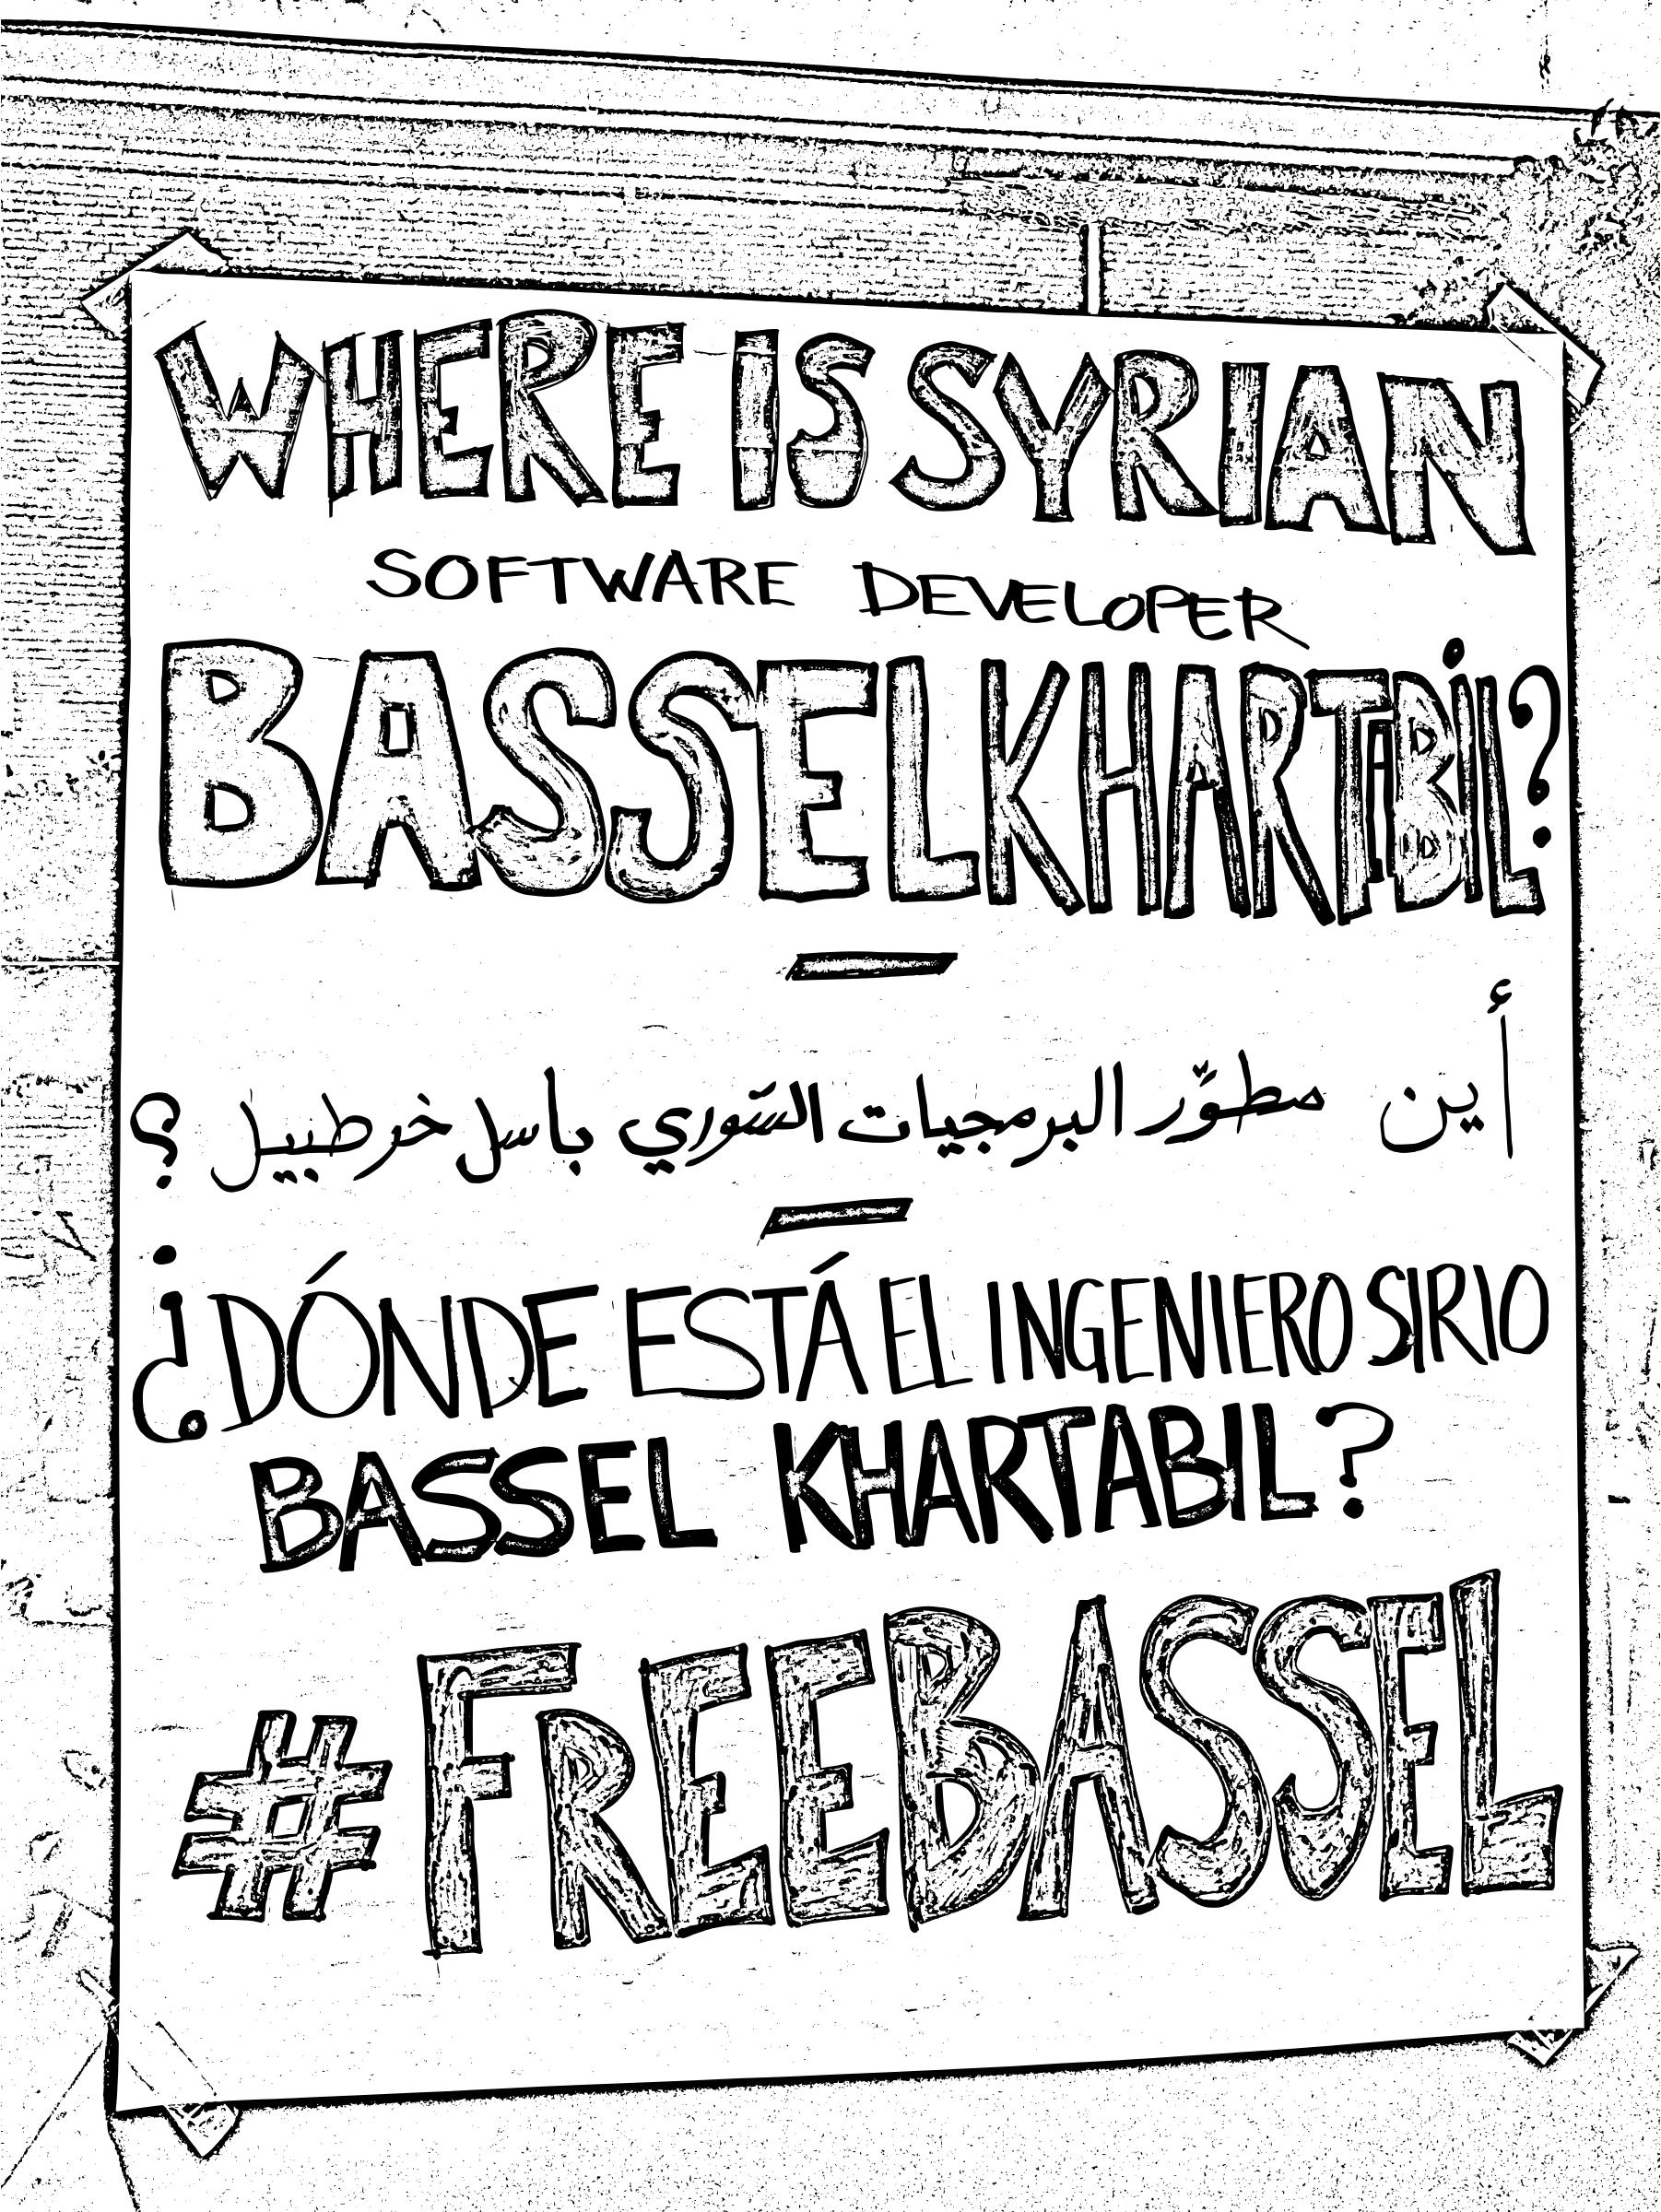 Poster for bassel at internet freedom festival in Valencia Spain. March 4. png